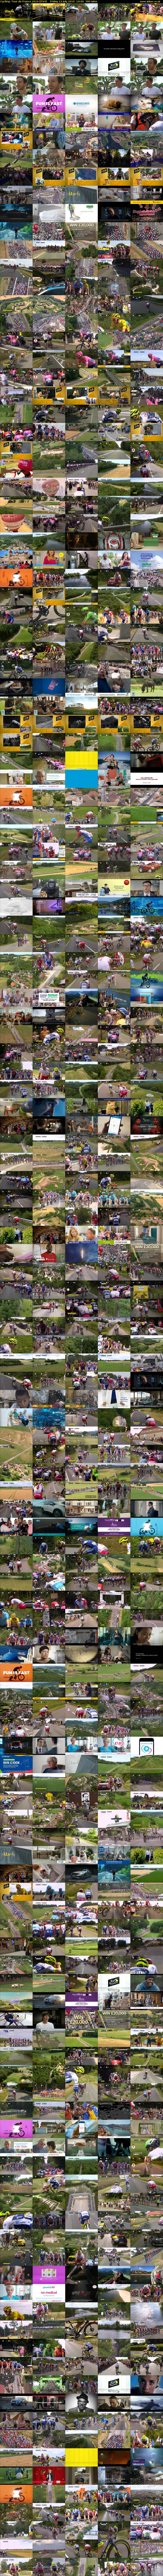 Cycling: Tour de France 2019 (ITV4) Friday 12 July 2019 10:00 - 16:30